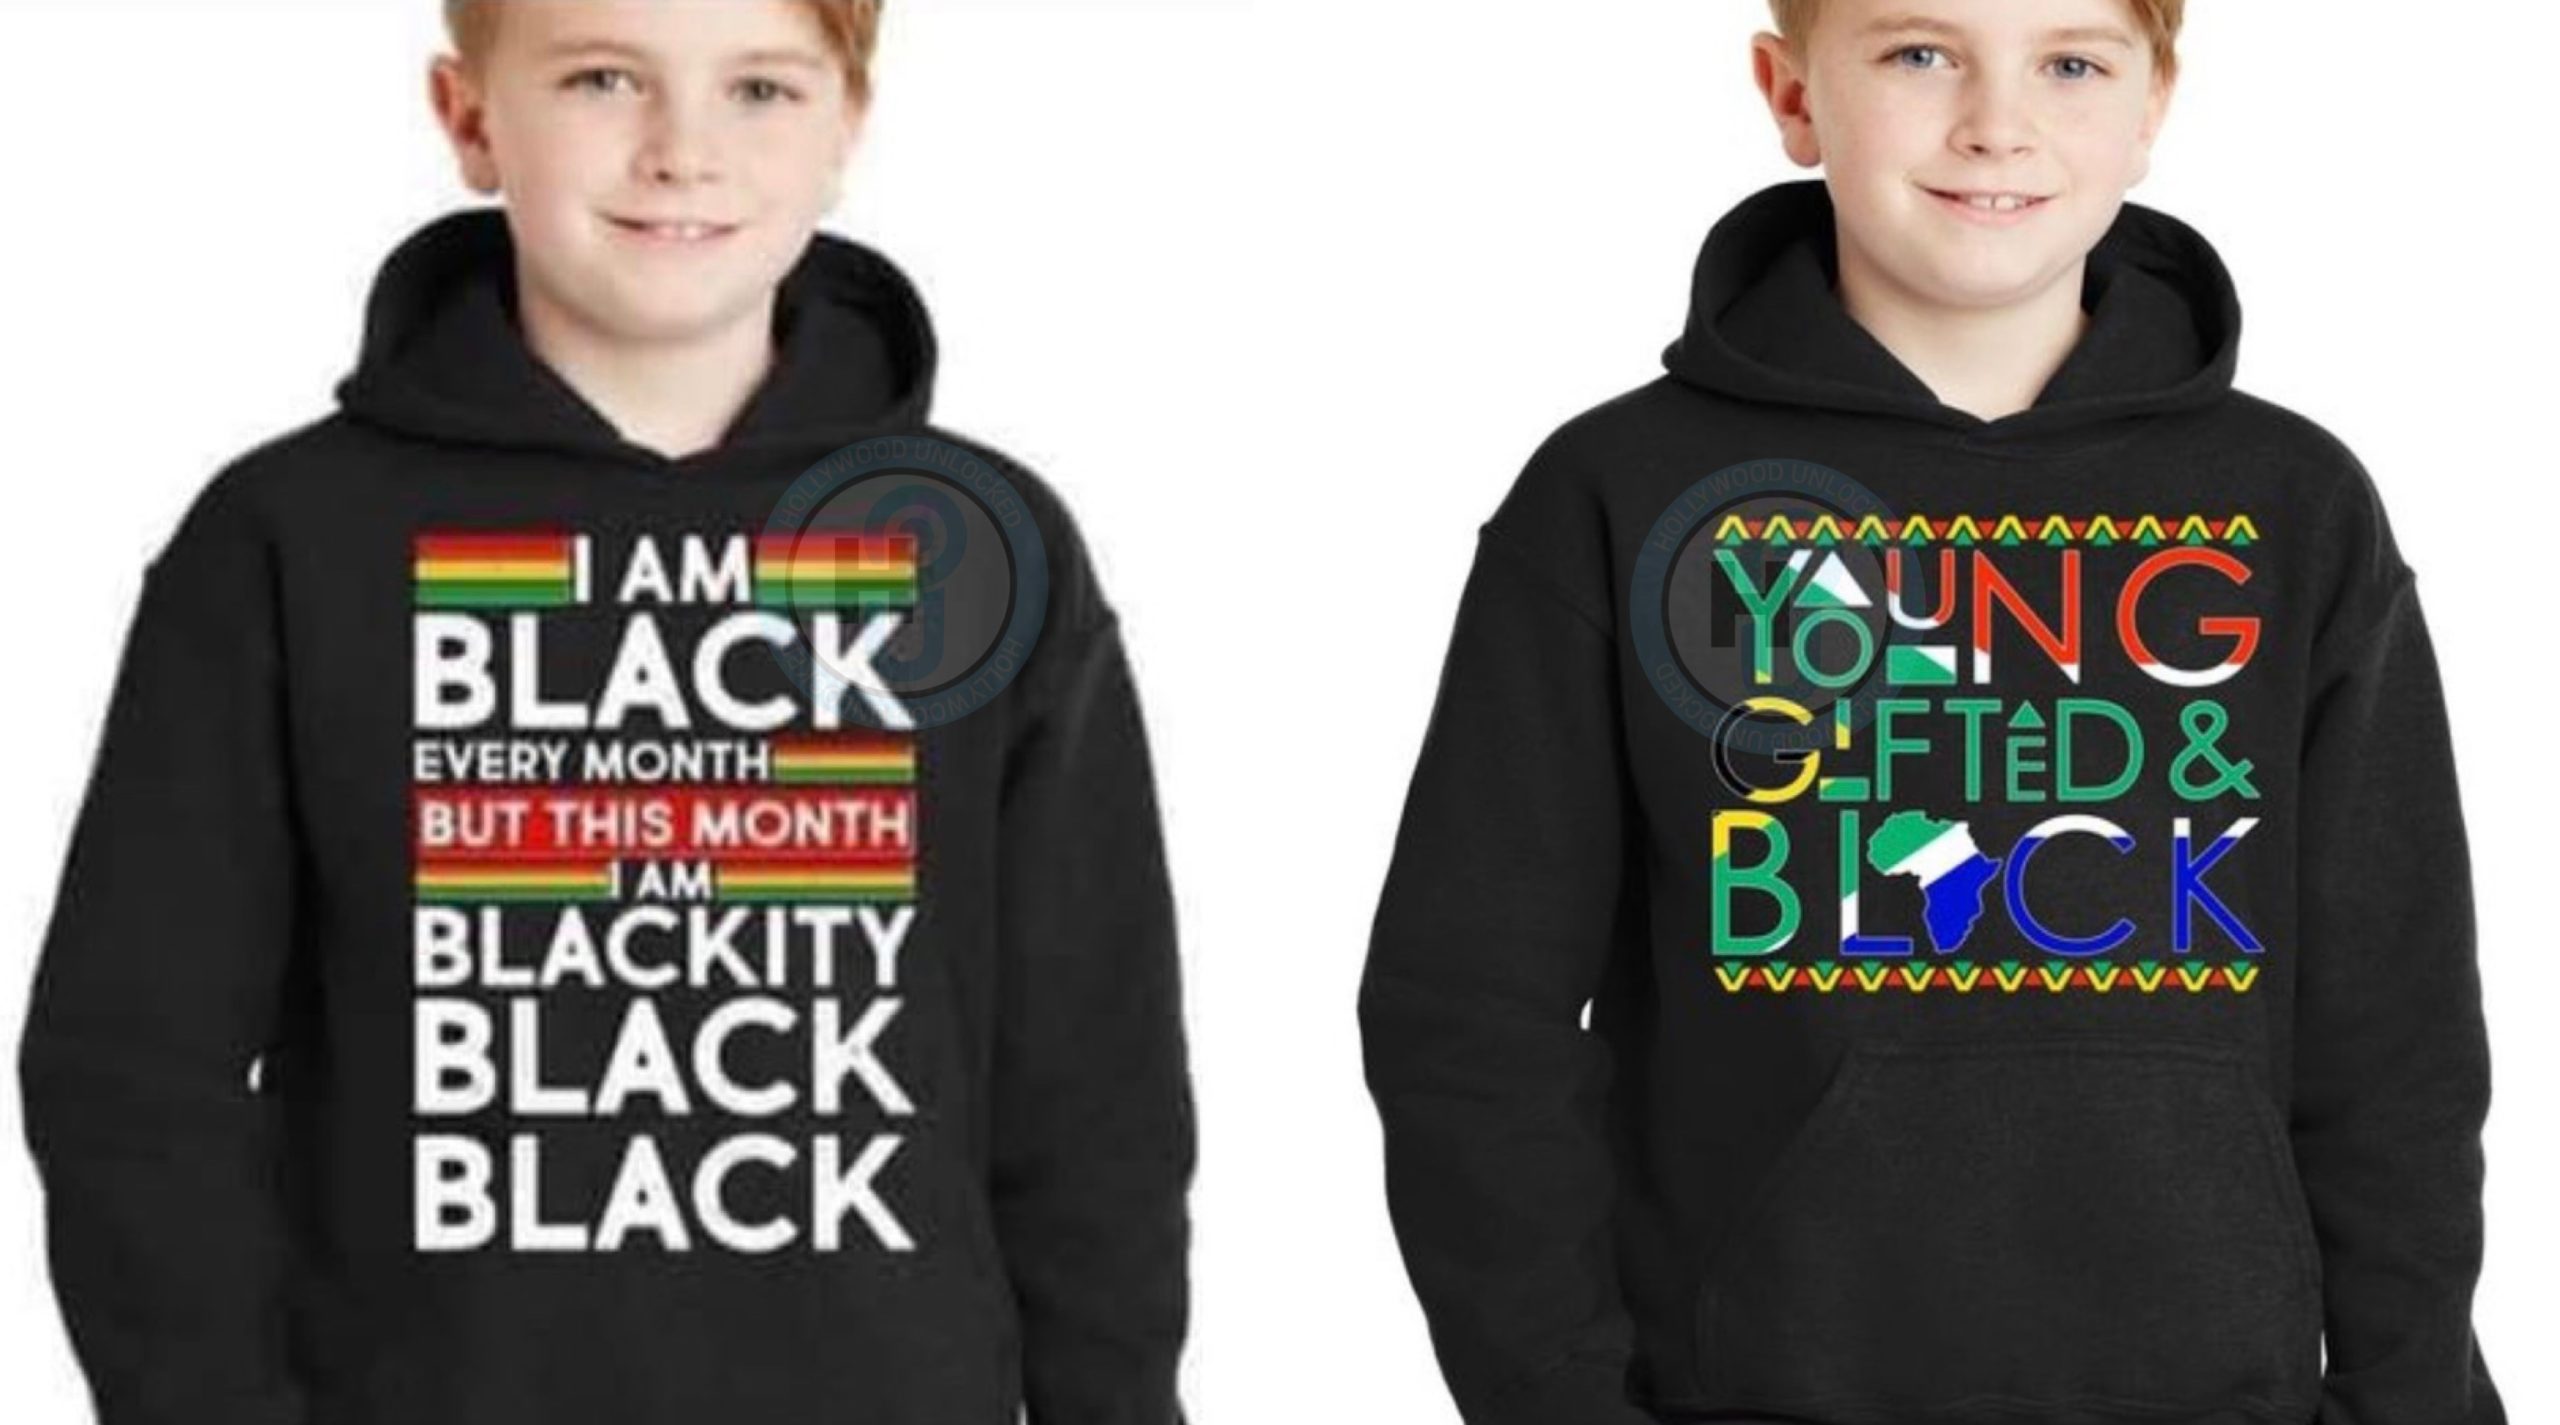 Clothing Site Tee Shirt Palace Under Fire Over White Boys Modeling Black History Month Hoodies & T-Shirts: I'm Blackity Black Black